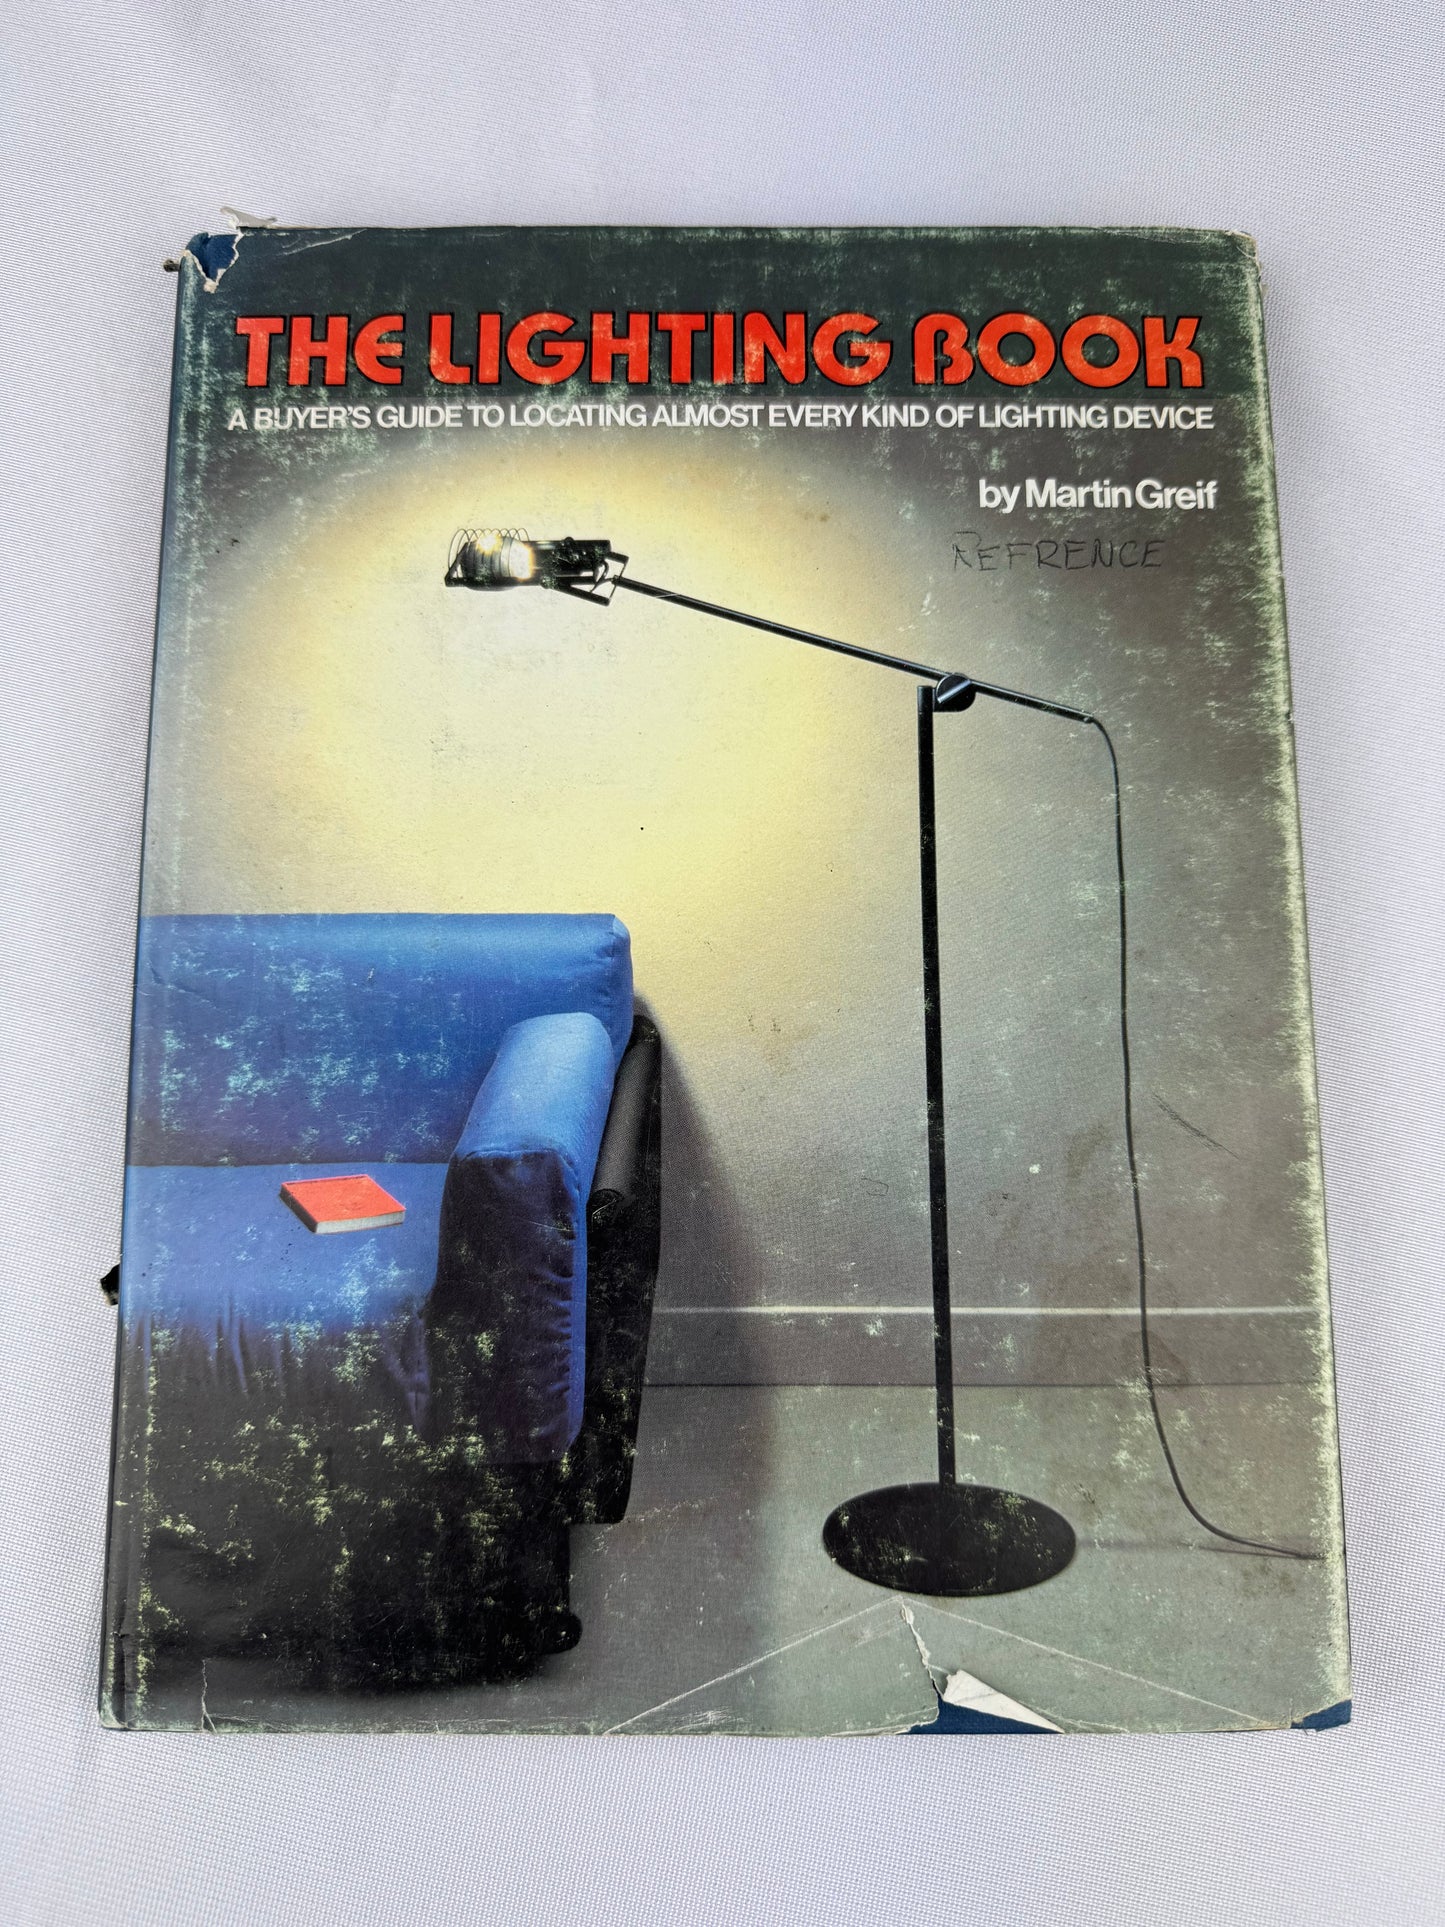 The Lighting Book: A Buyer's Guide to Locating Almost Every Kind of Lighting Device, 1986